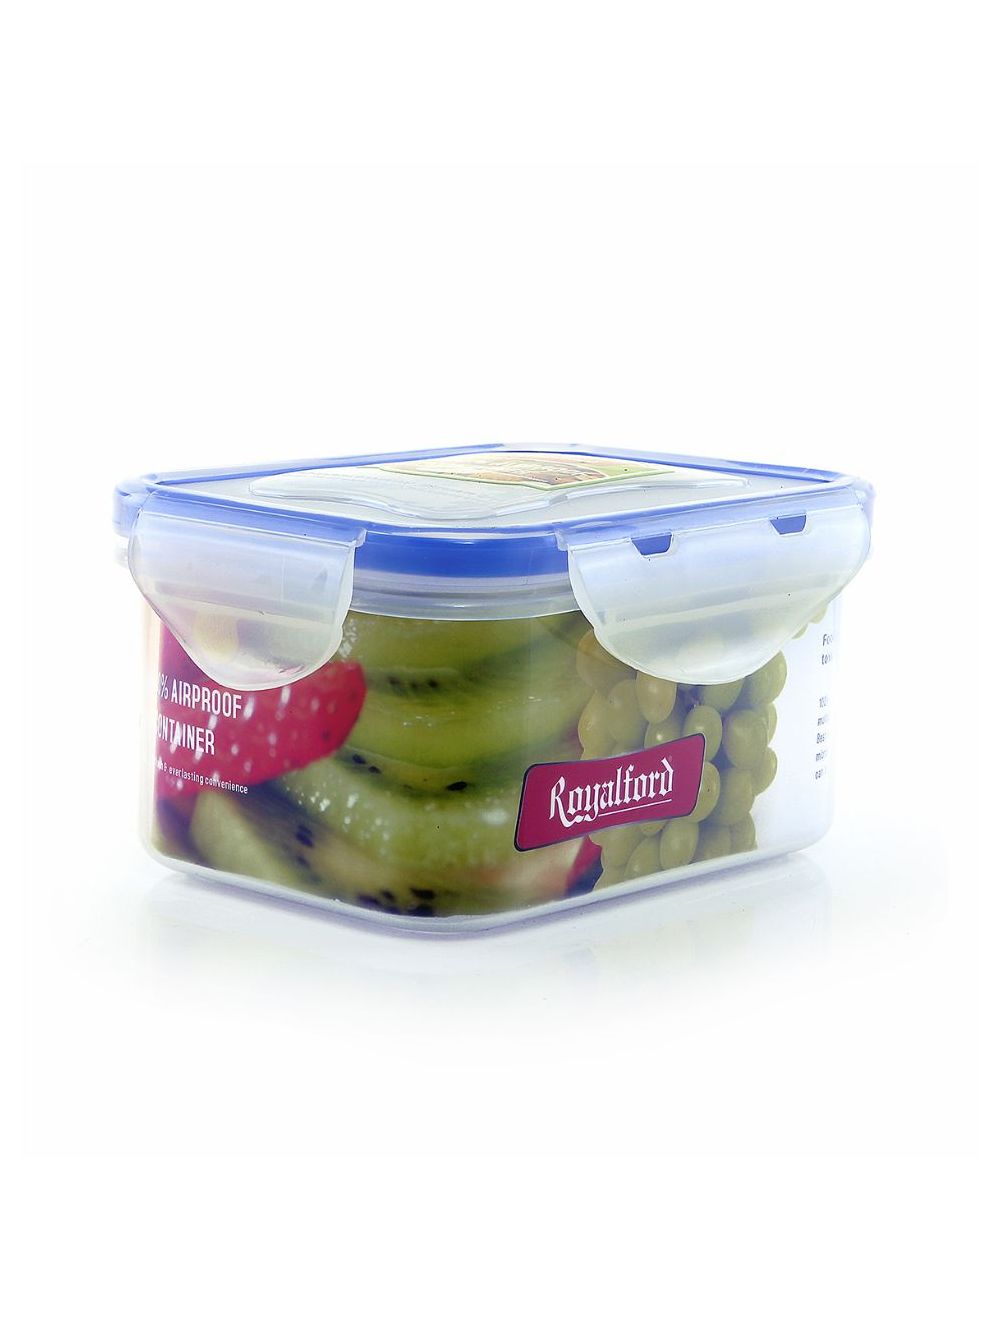 Royal Ford Airproof Box 500 mL | Airproof Storage Box | Royal Ford Kitchen Organizer | 500 mL Food Container | Transparent Culinary Storage | Modern Kitchen Essentials | Stylish Food Preservation | Minimalist Storage Solution | Organizational Elegance | Kitchen Accessory | Freshness-Preserving Box | Culinary Space Upgrade | Transparent Food Storage | Functional Kitchenware | Compact Food Storage | Halabh.com